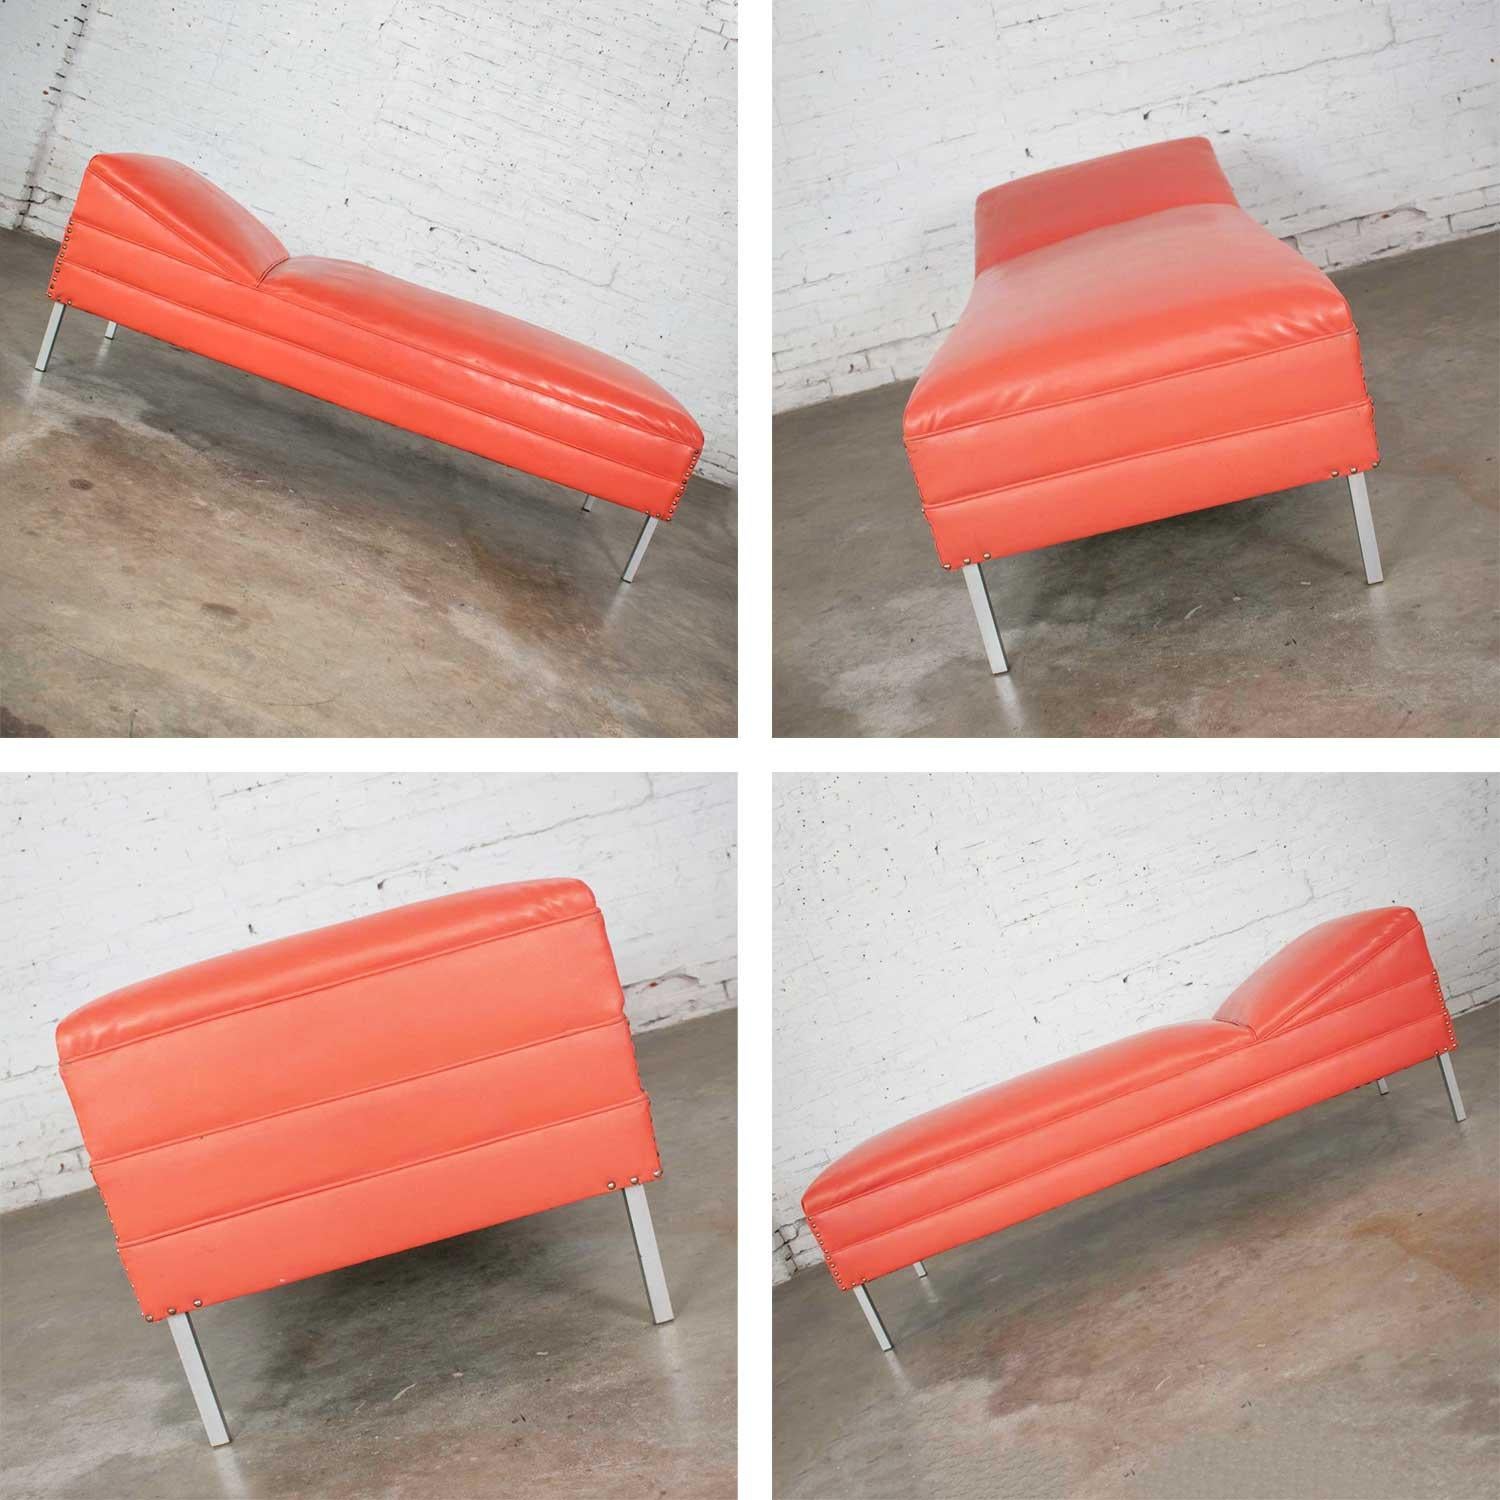 Mid-Century Modern Chaise or Day Bed in Coral Vinyl Faux Leather Aluminum Legs For Sale 3